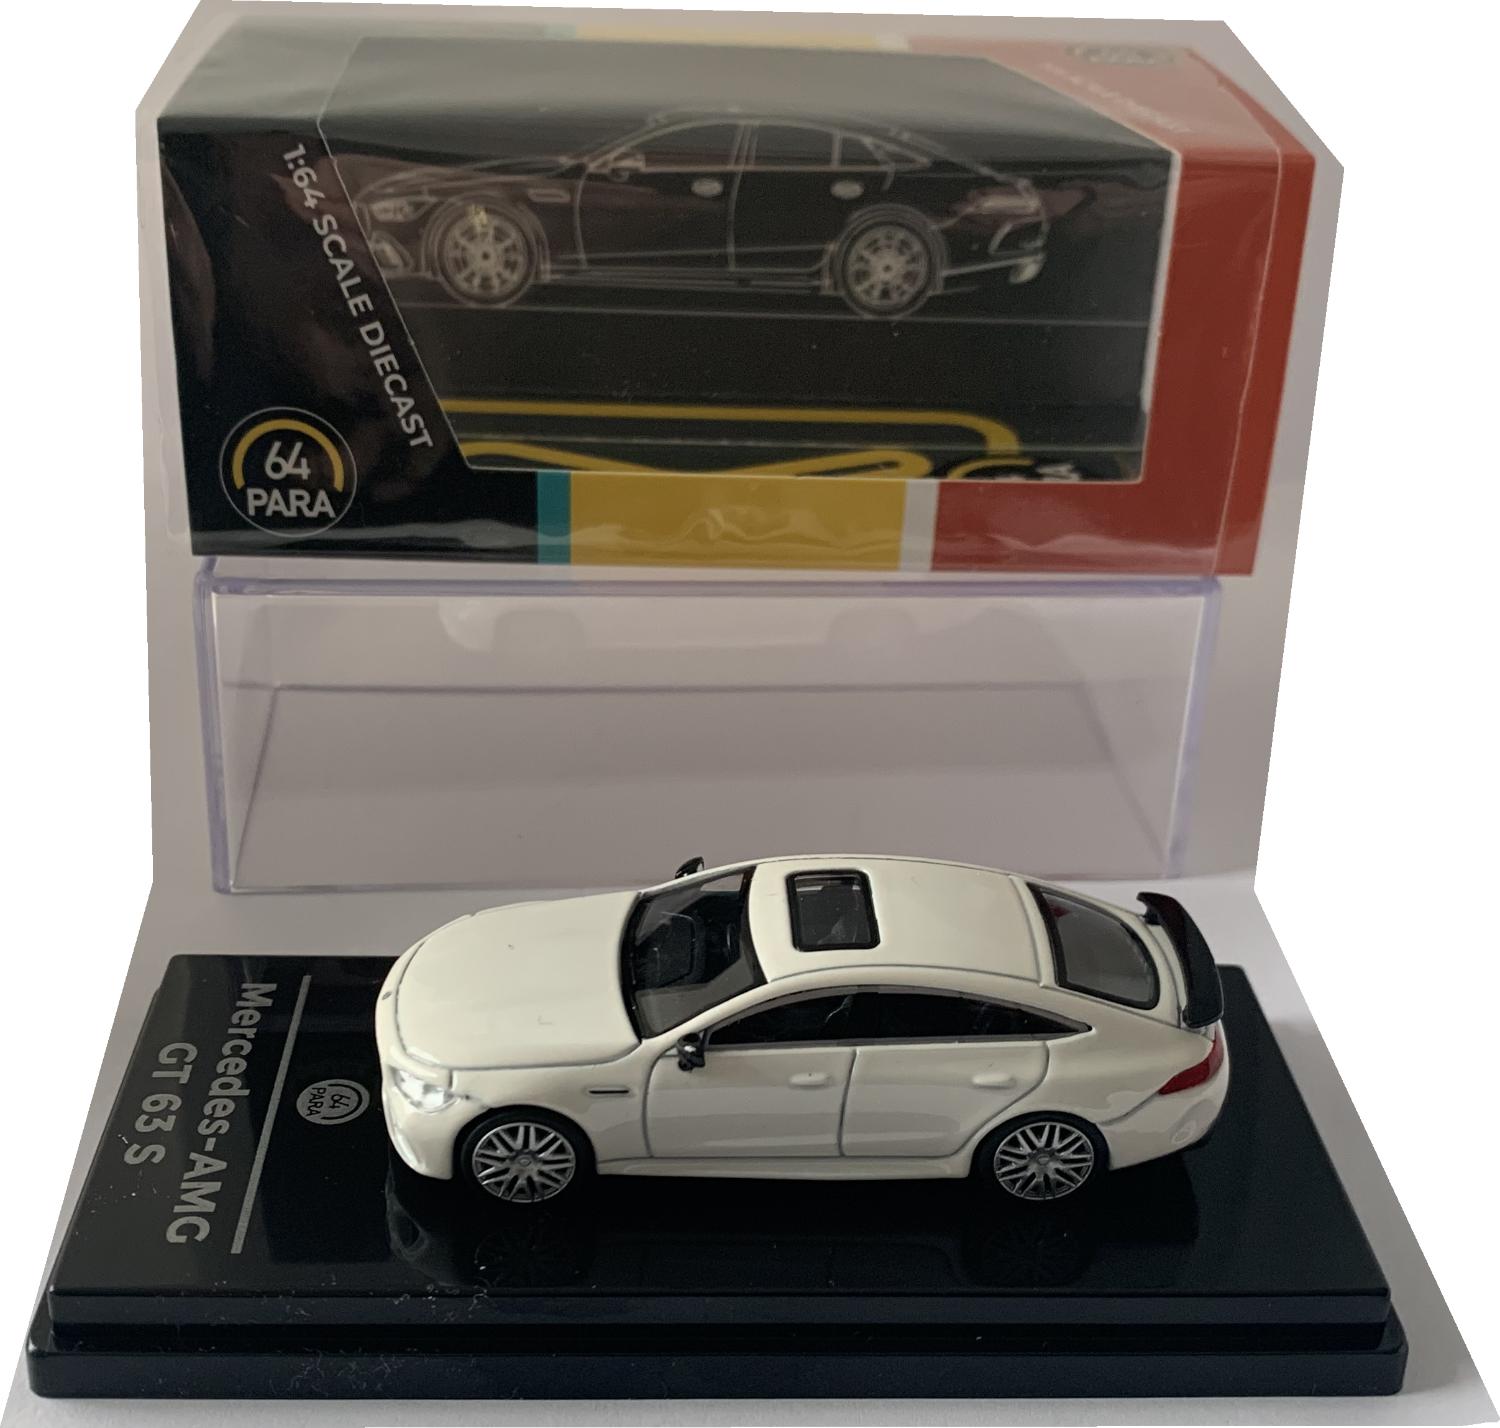 A good reproduction of the Mercedes AMG GT 63 S mounted on a removable plinth and a removable hard plastic cover